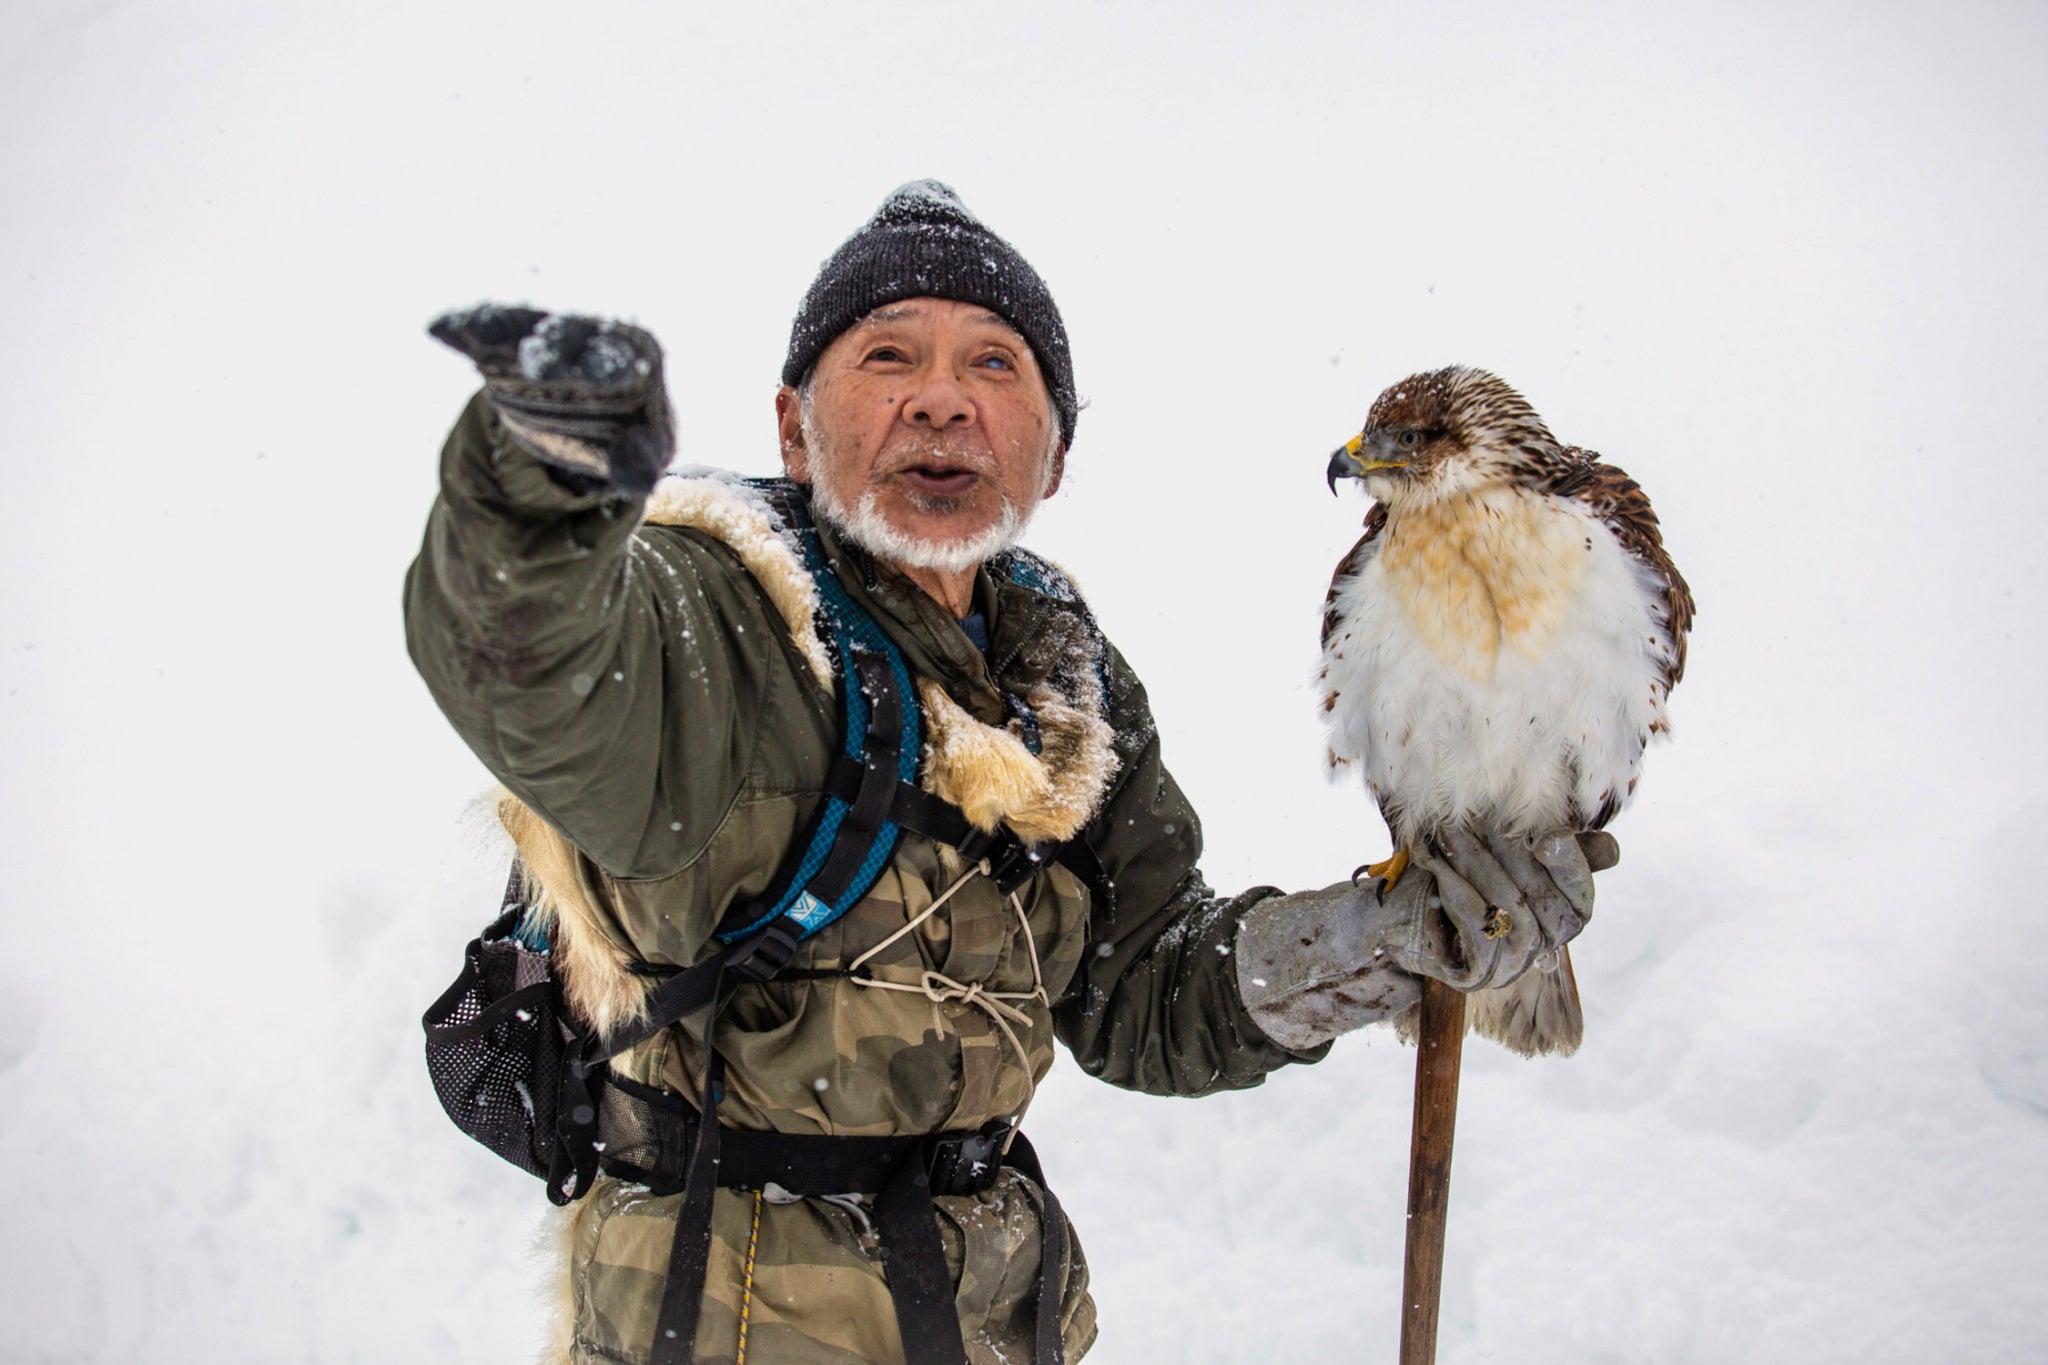 “To me, falconry is being together with the hawk. Living together with the hawk, walking through the mountains together and being able to hunt is enough. I don’t need anything else.” —Hidetoshi Matsubara